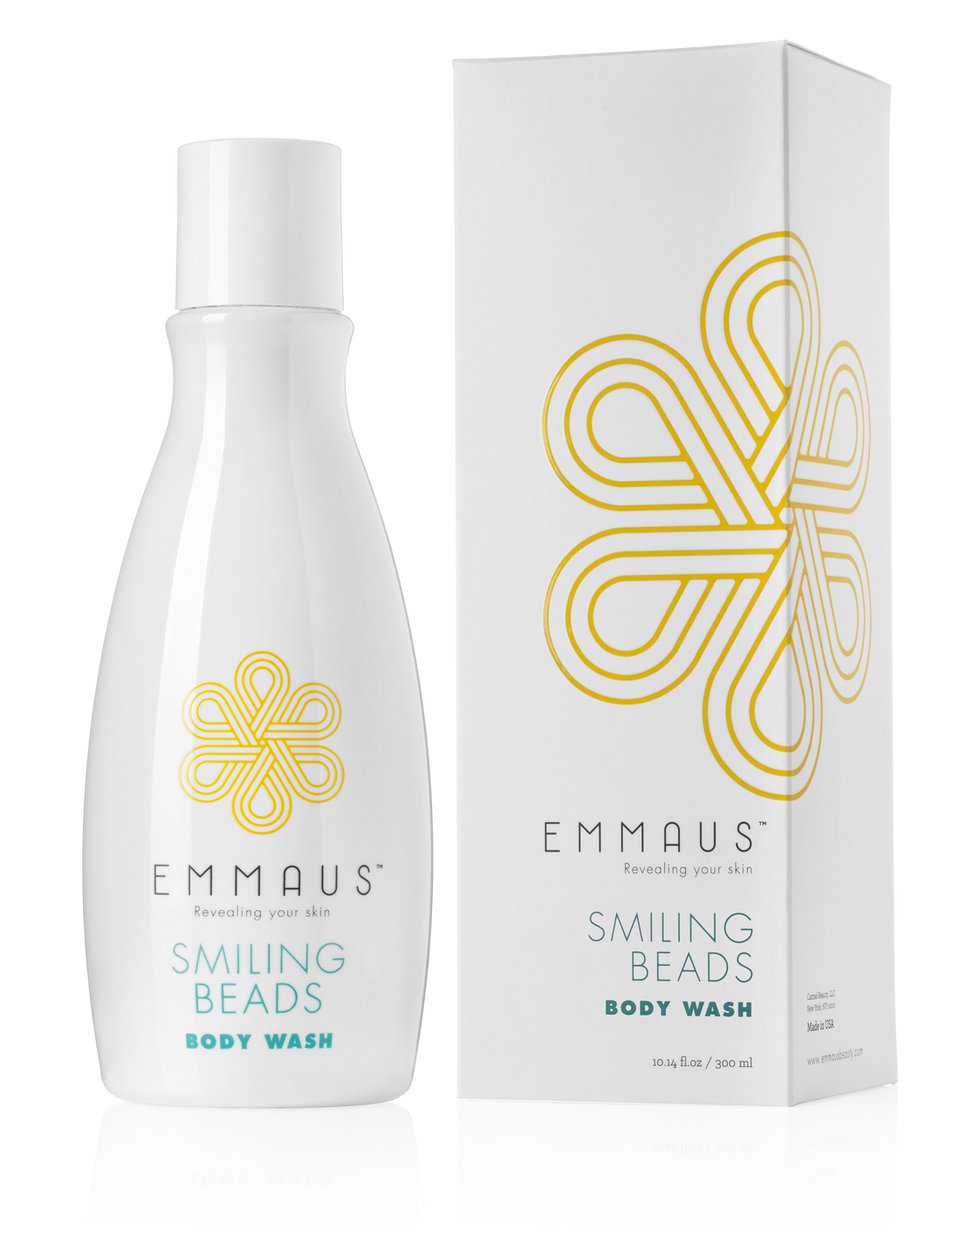 Smiling Beads Body Wash by Emmaus